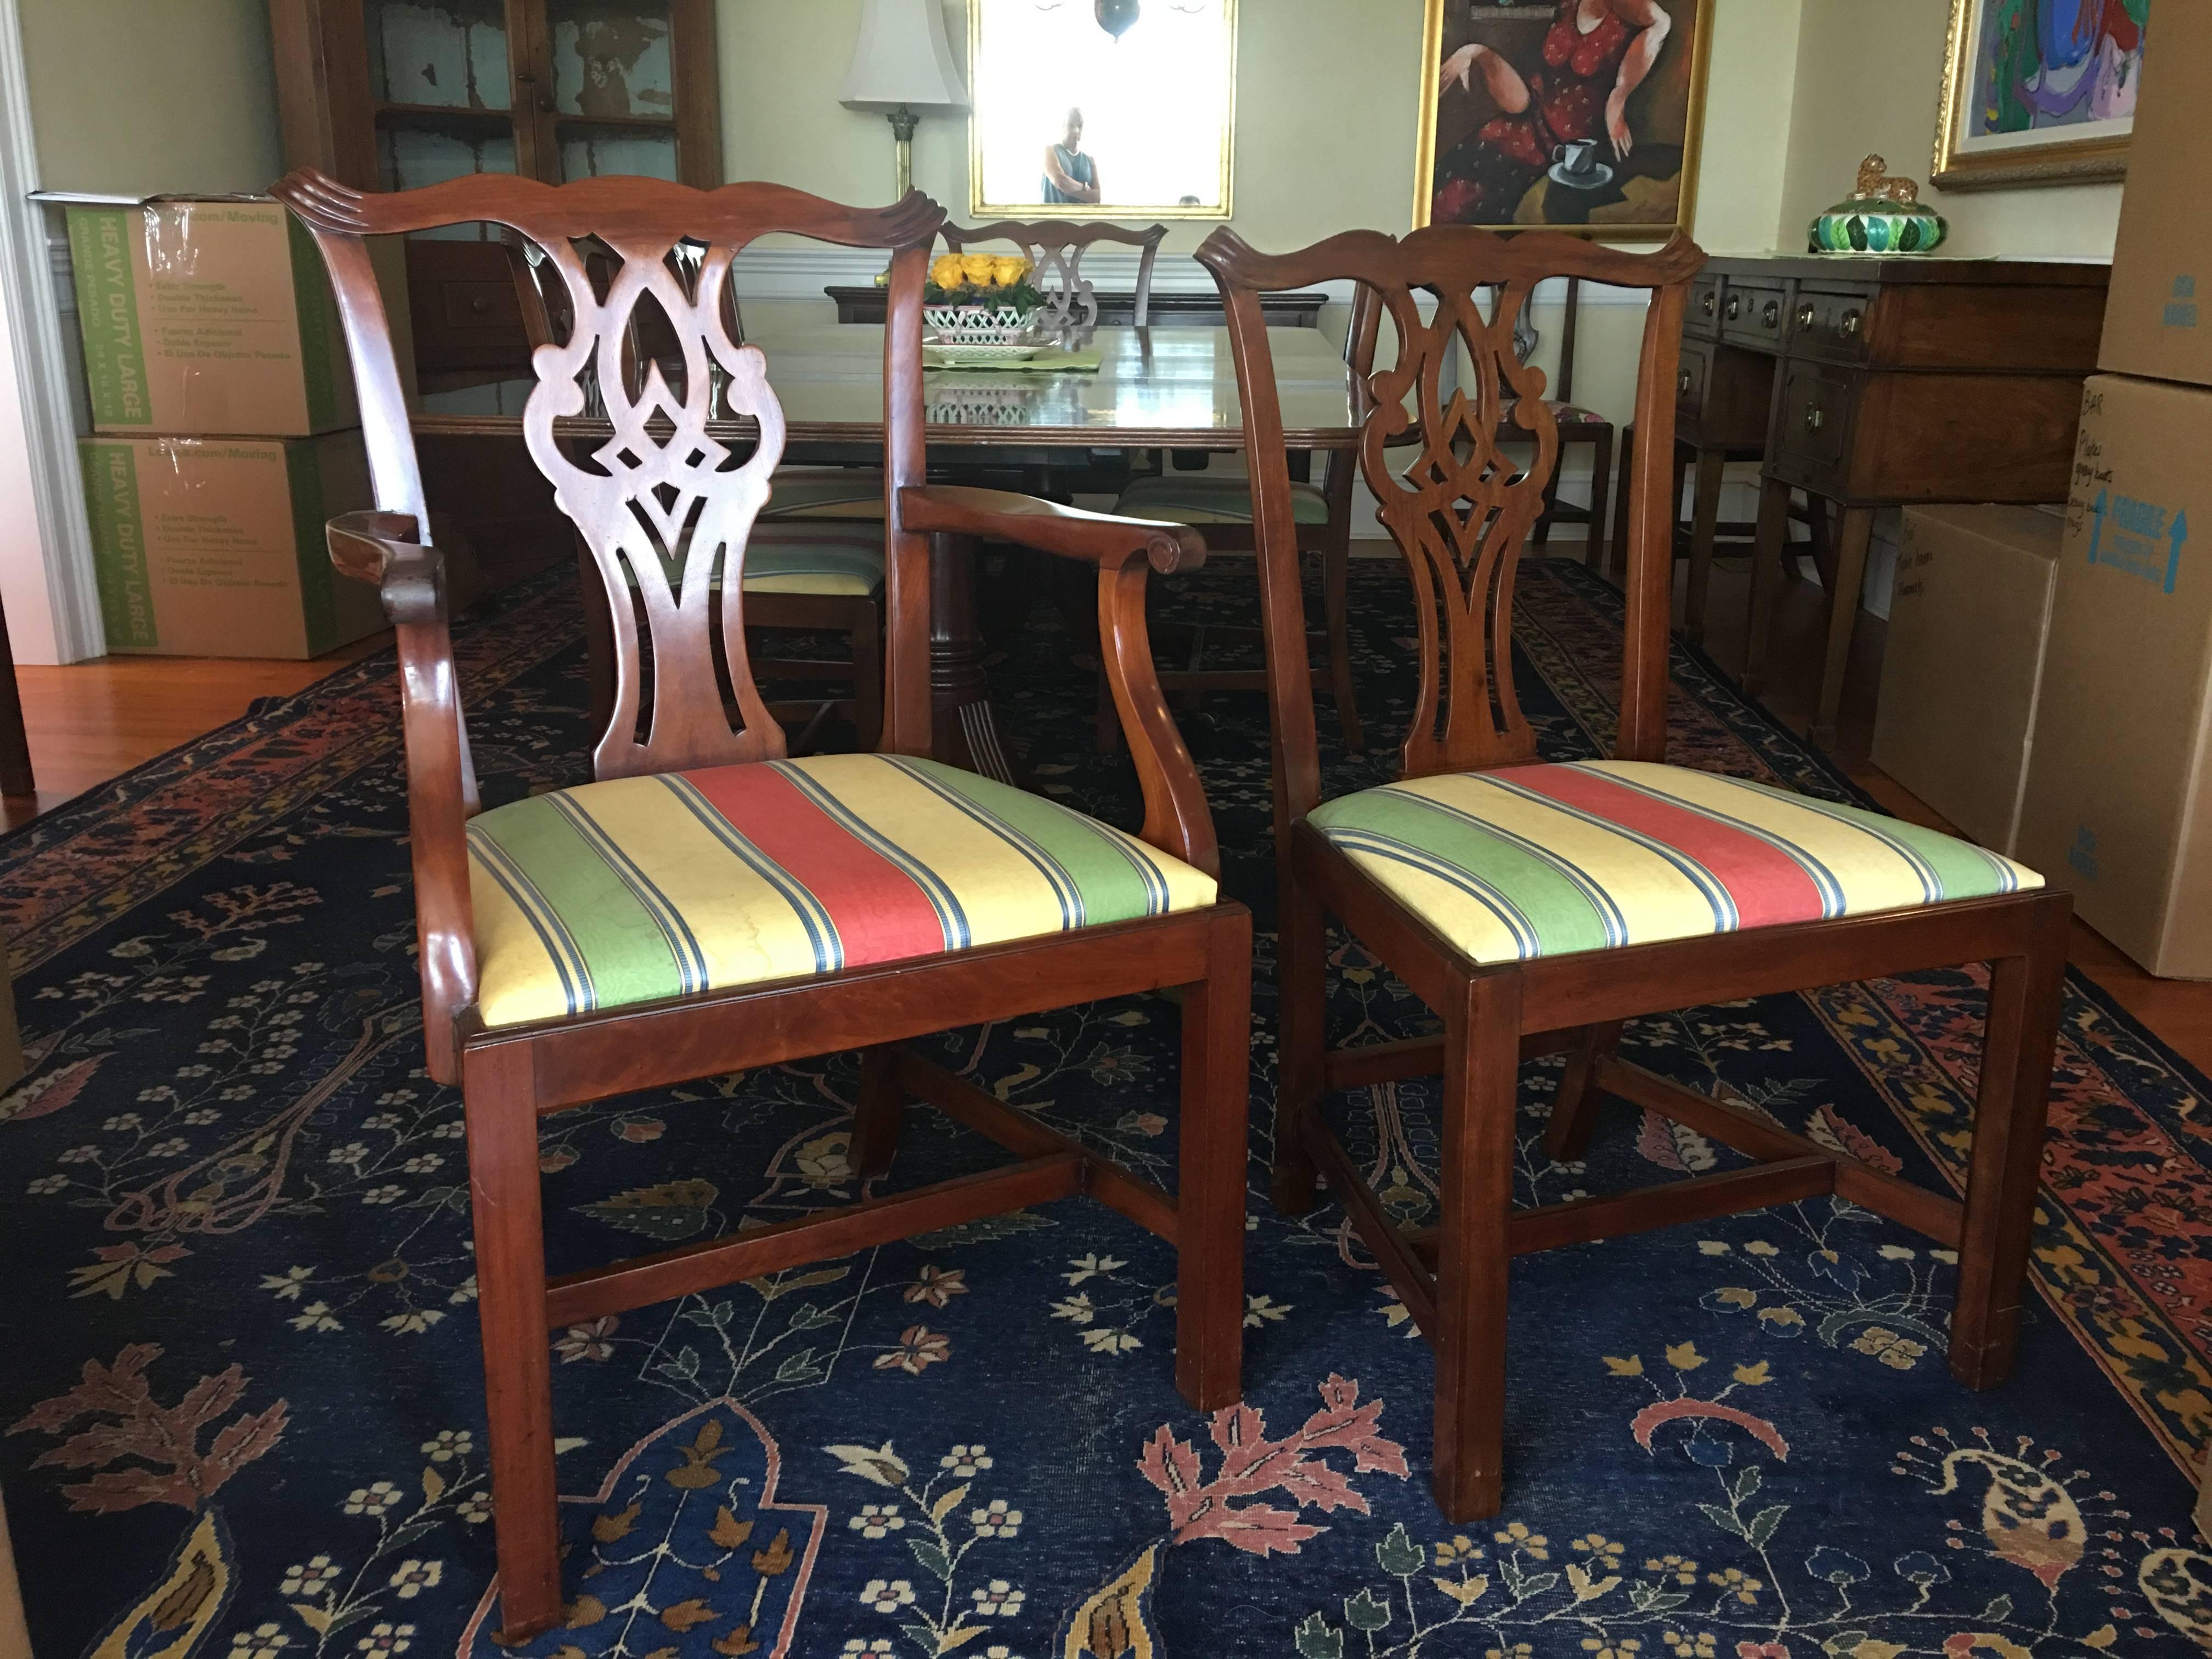 English set of Eight Chippendale style mahogany dining room chairs, circa 1870. Set includes two open armchairs and six side chairs, featuring a shaped horizontal crest rail with scrolled reeded ears, above a complex vasiform splat surmounting